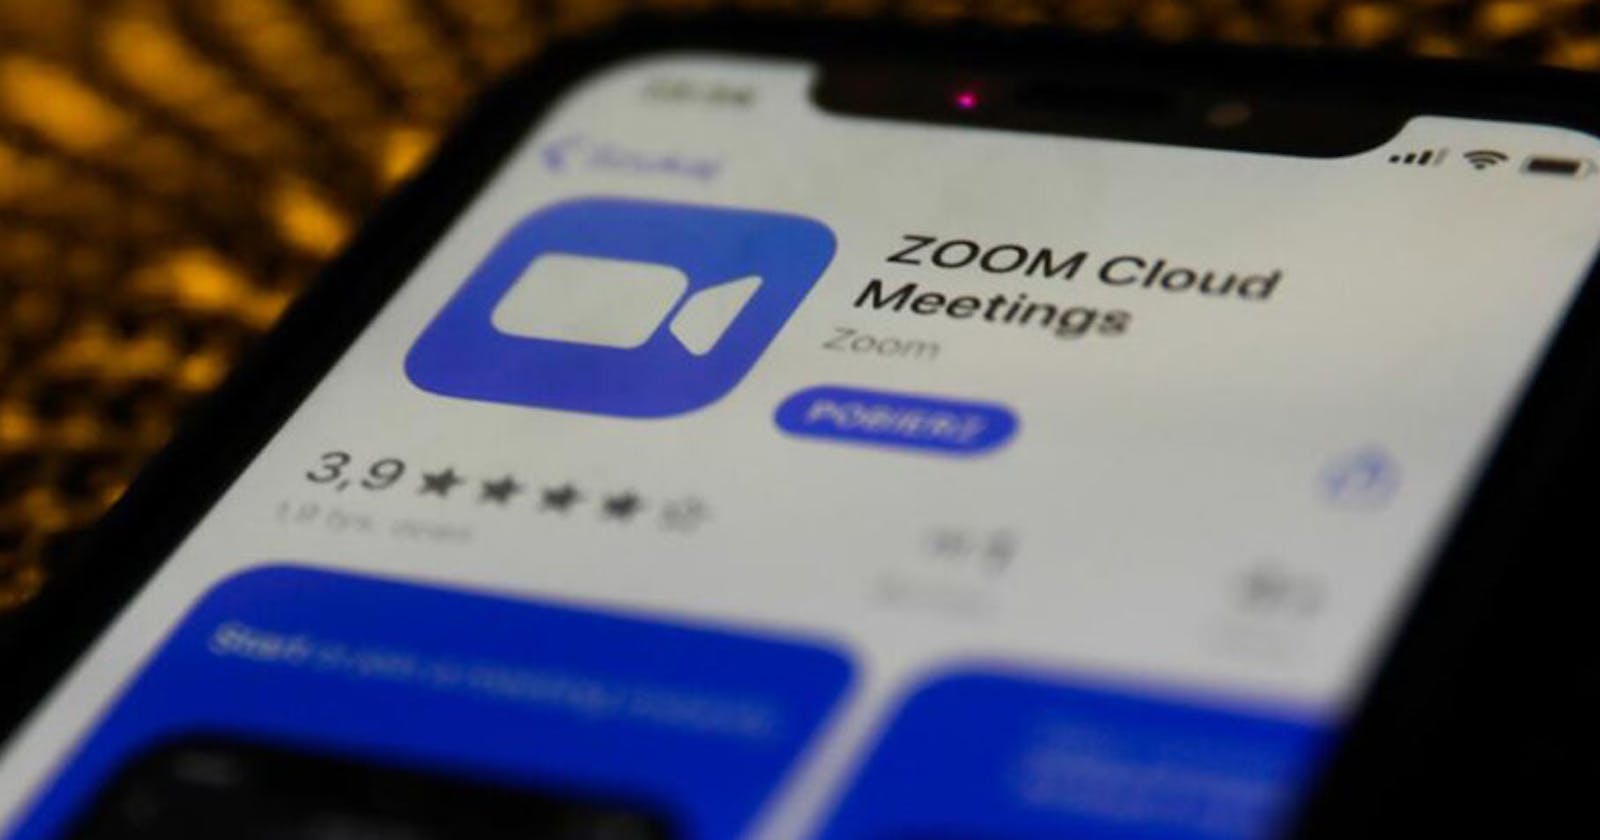 Does the Zoom Chat Encryption Feature Sound Like ‘Security Is Not Free’?